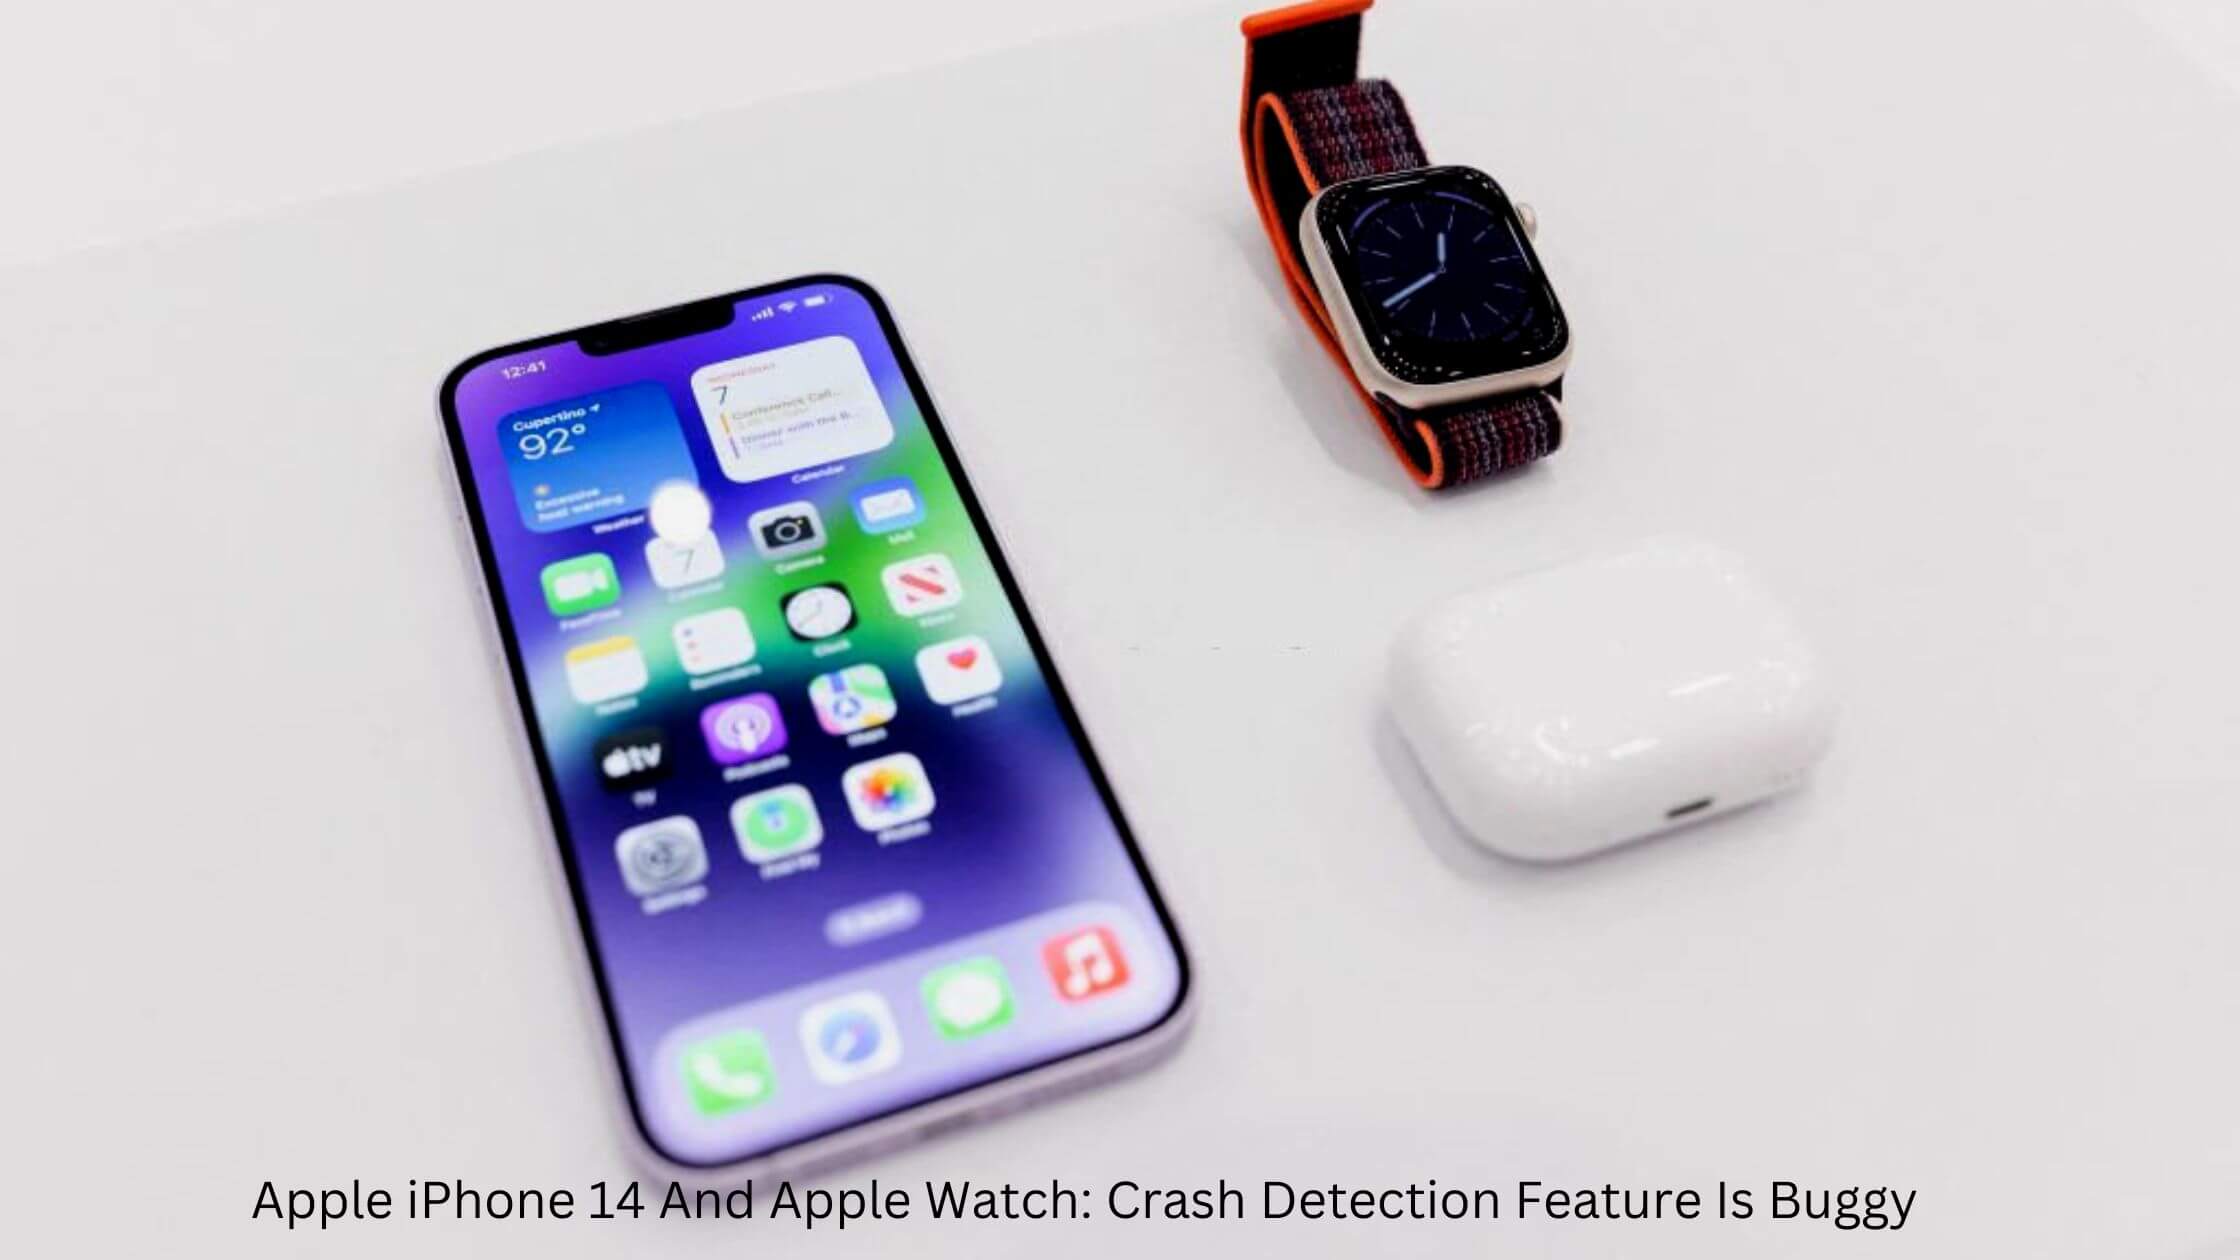 Apple iPhone 14 And Apple Watch Crash Detection Feature Is Buggy